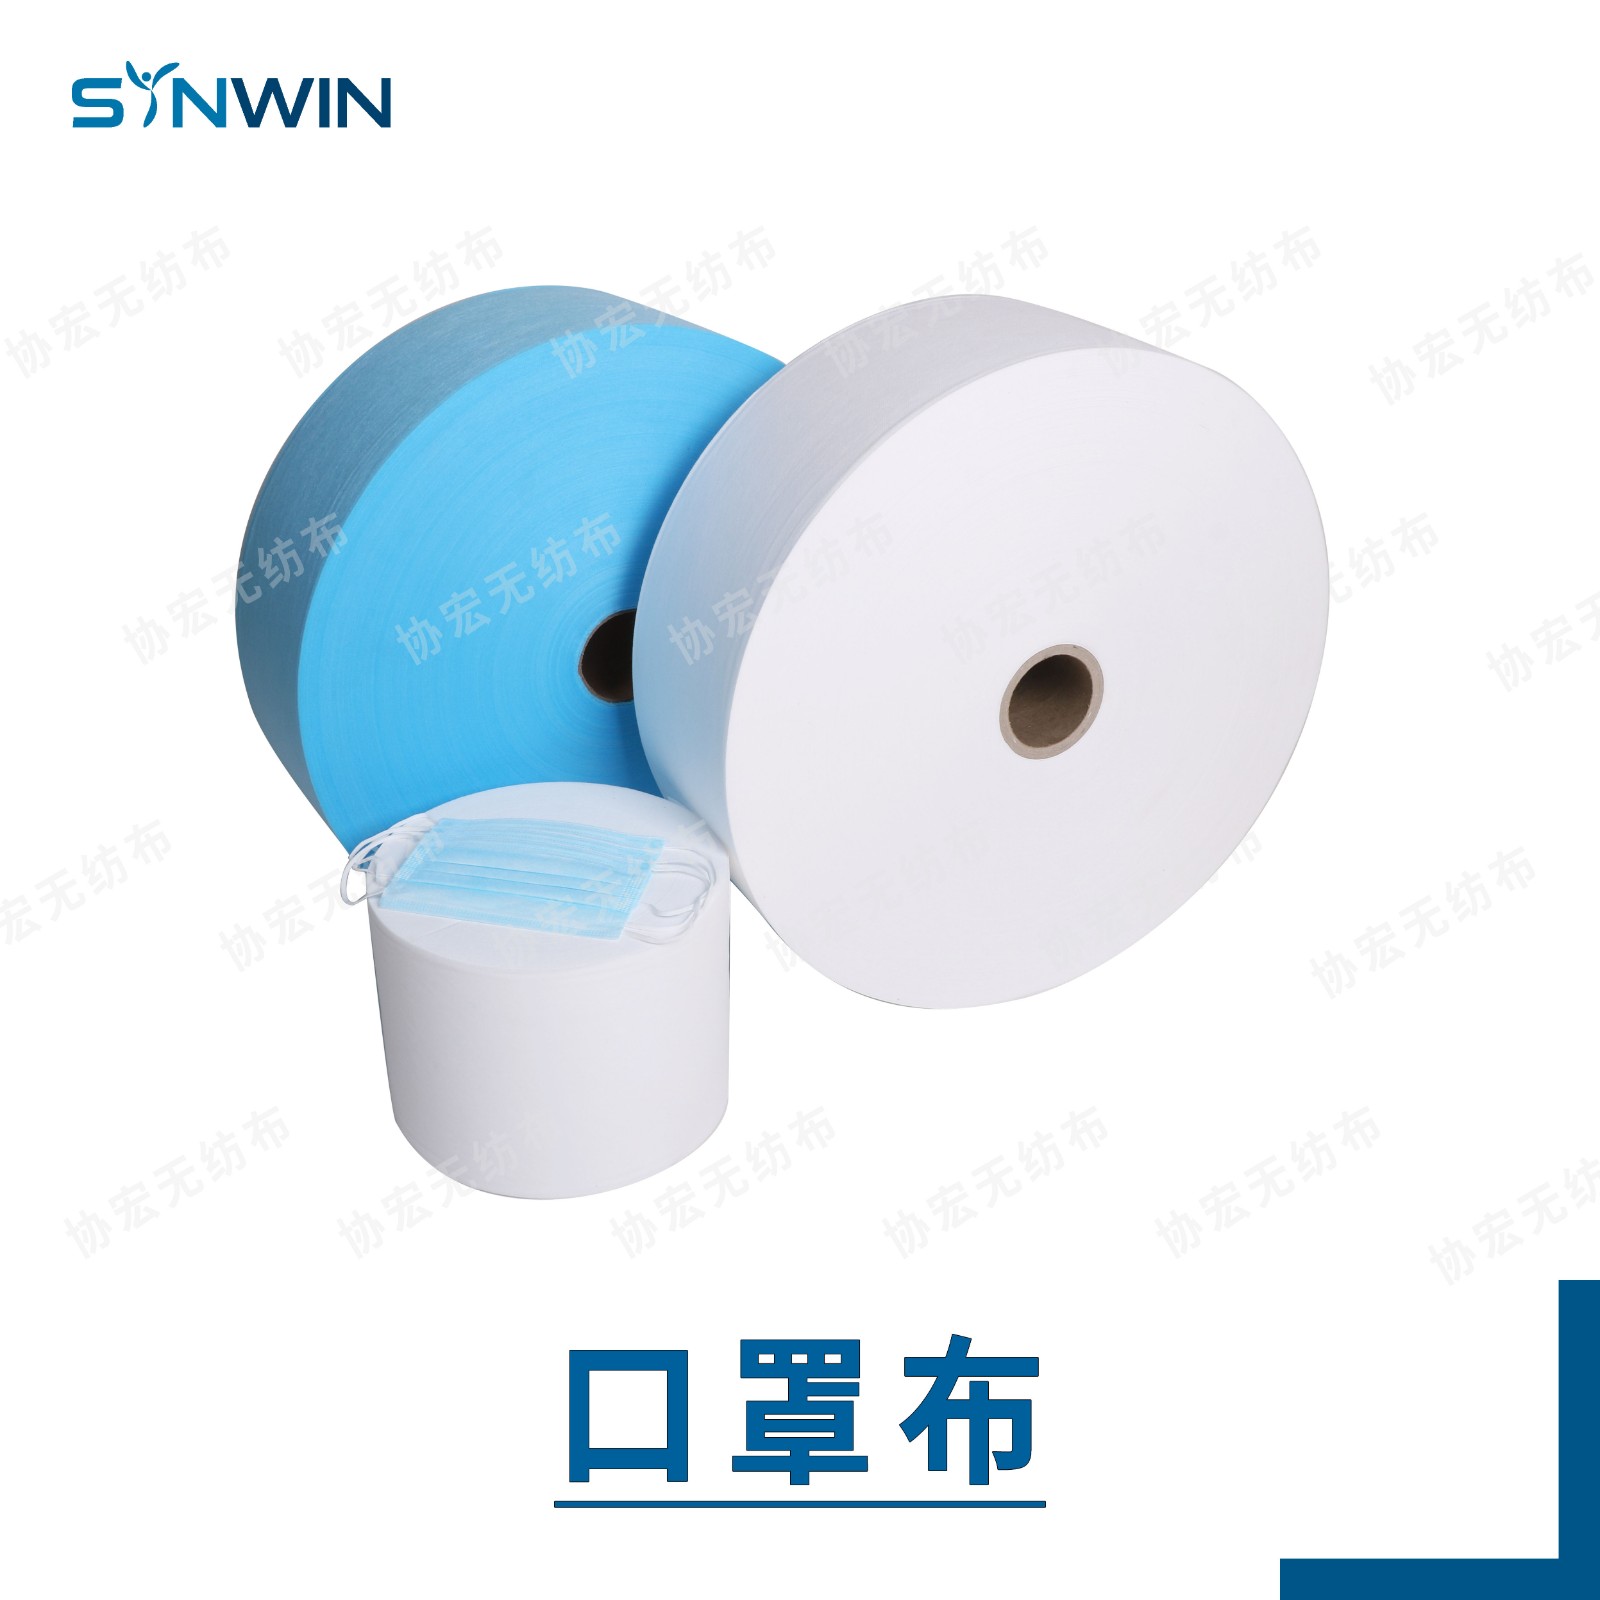 product-Synwin-img